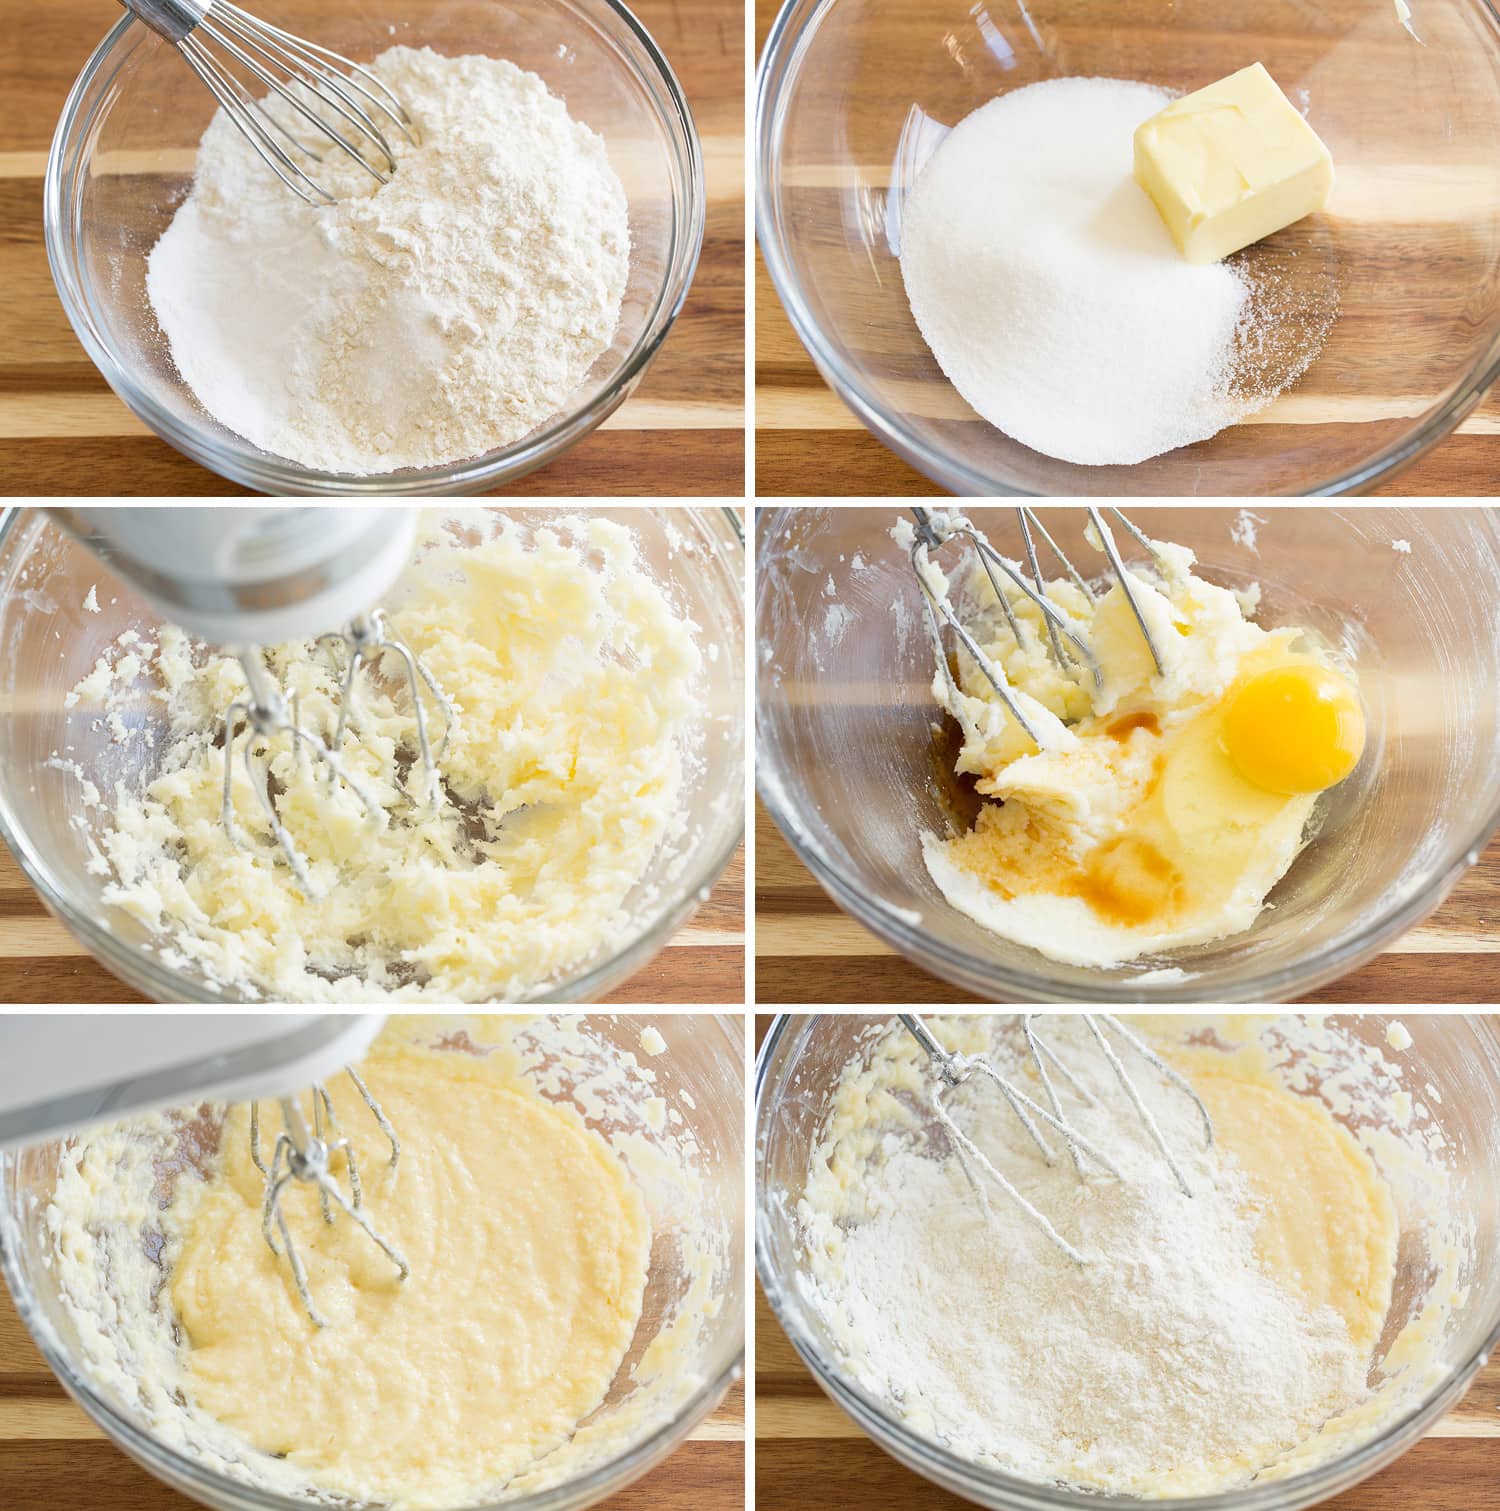 Steps of making cupcake batter in a glass bowl with an electric mixer.